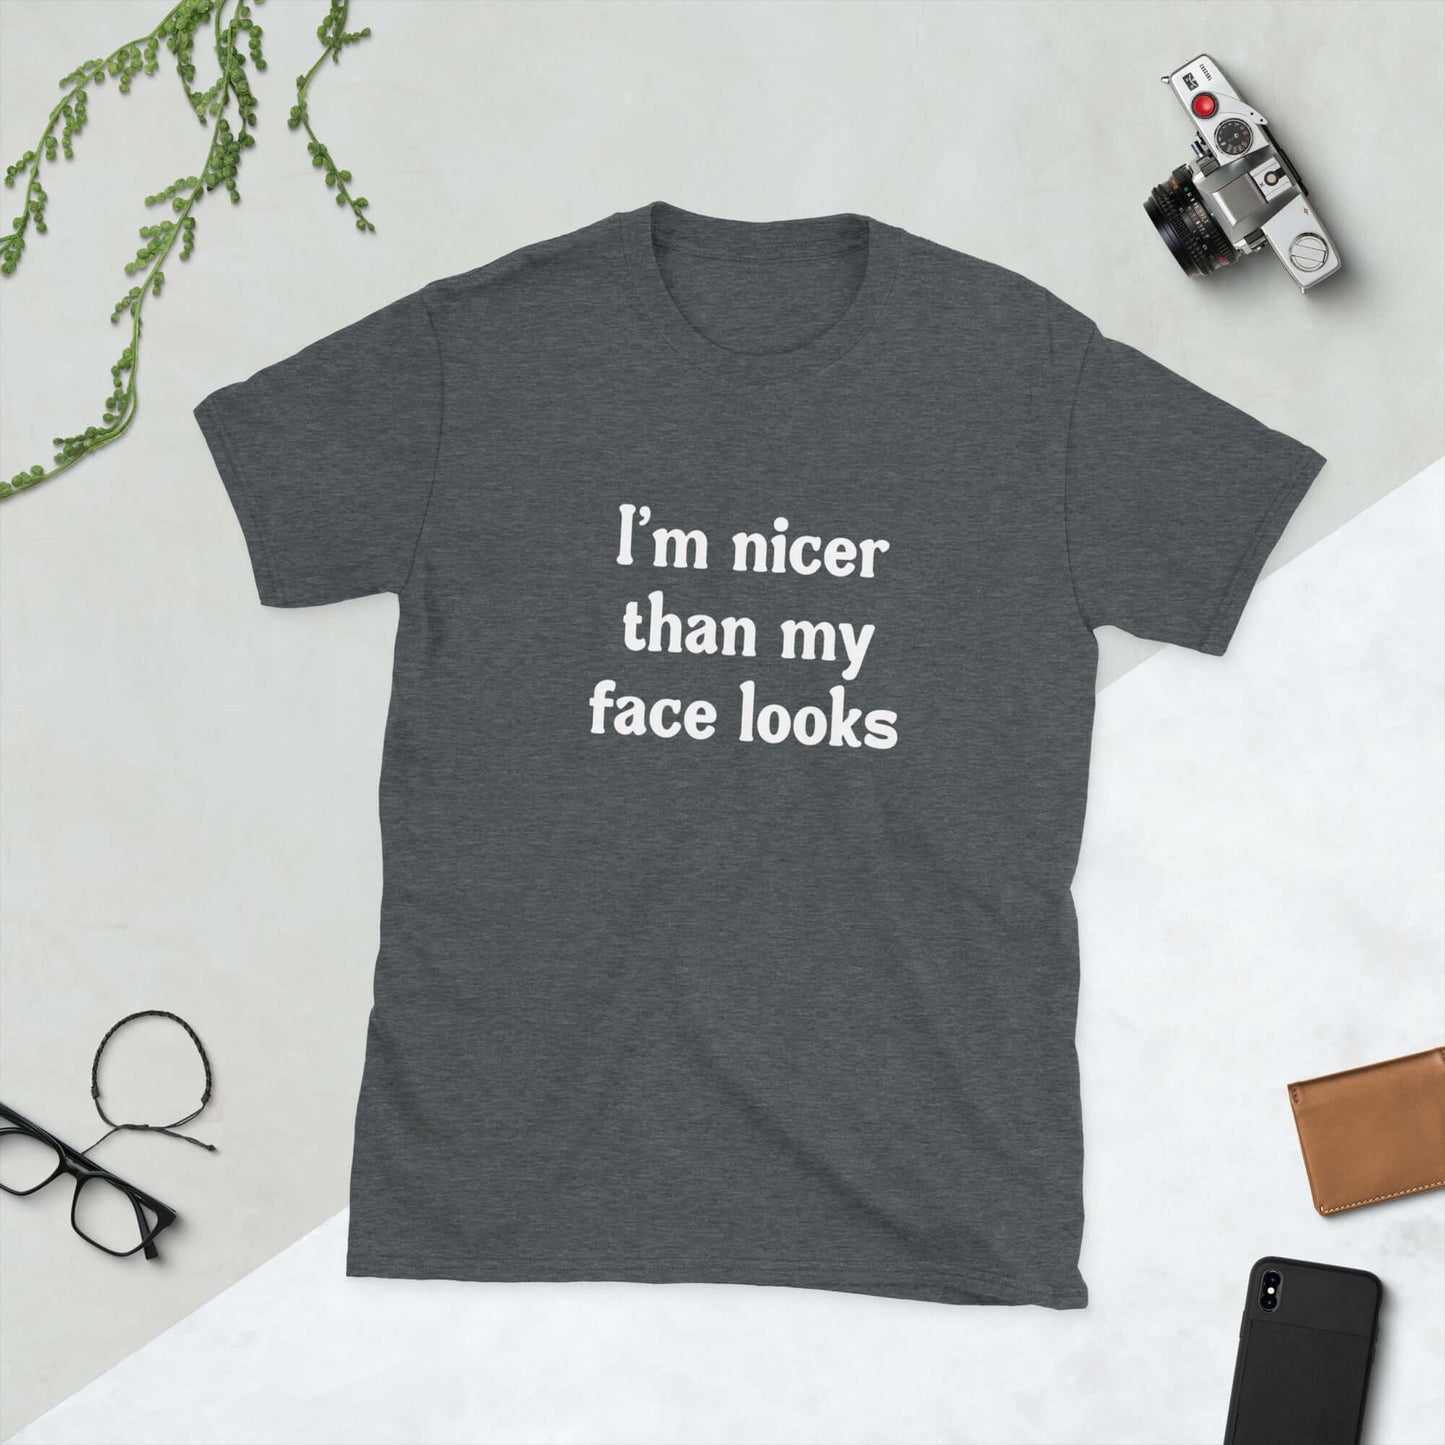 Dark heather t-shirt that says I'm nicer than my face looks printed on the front.